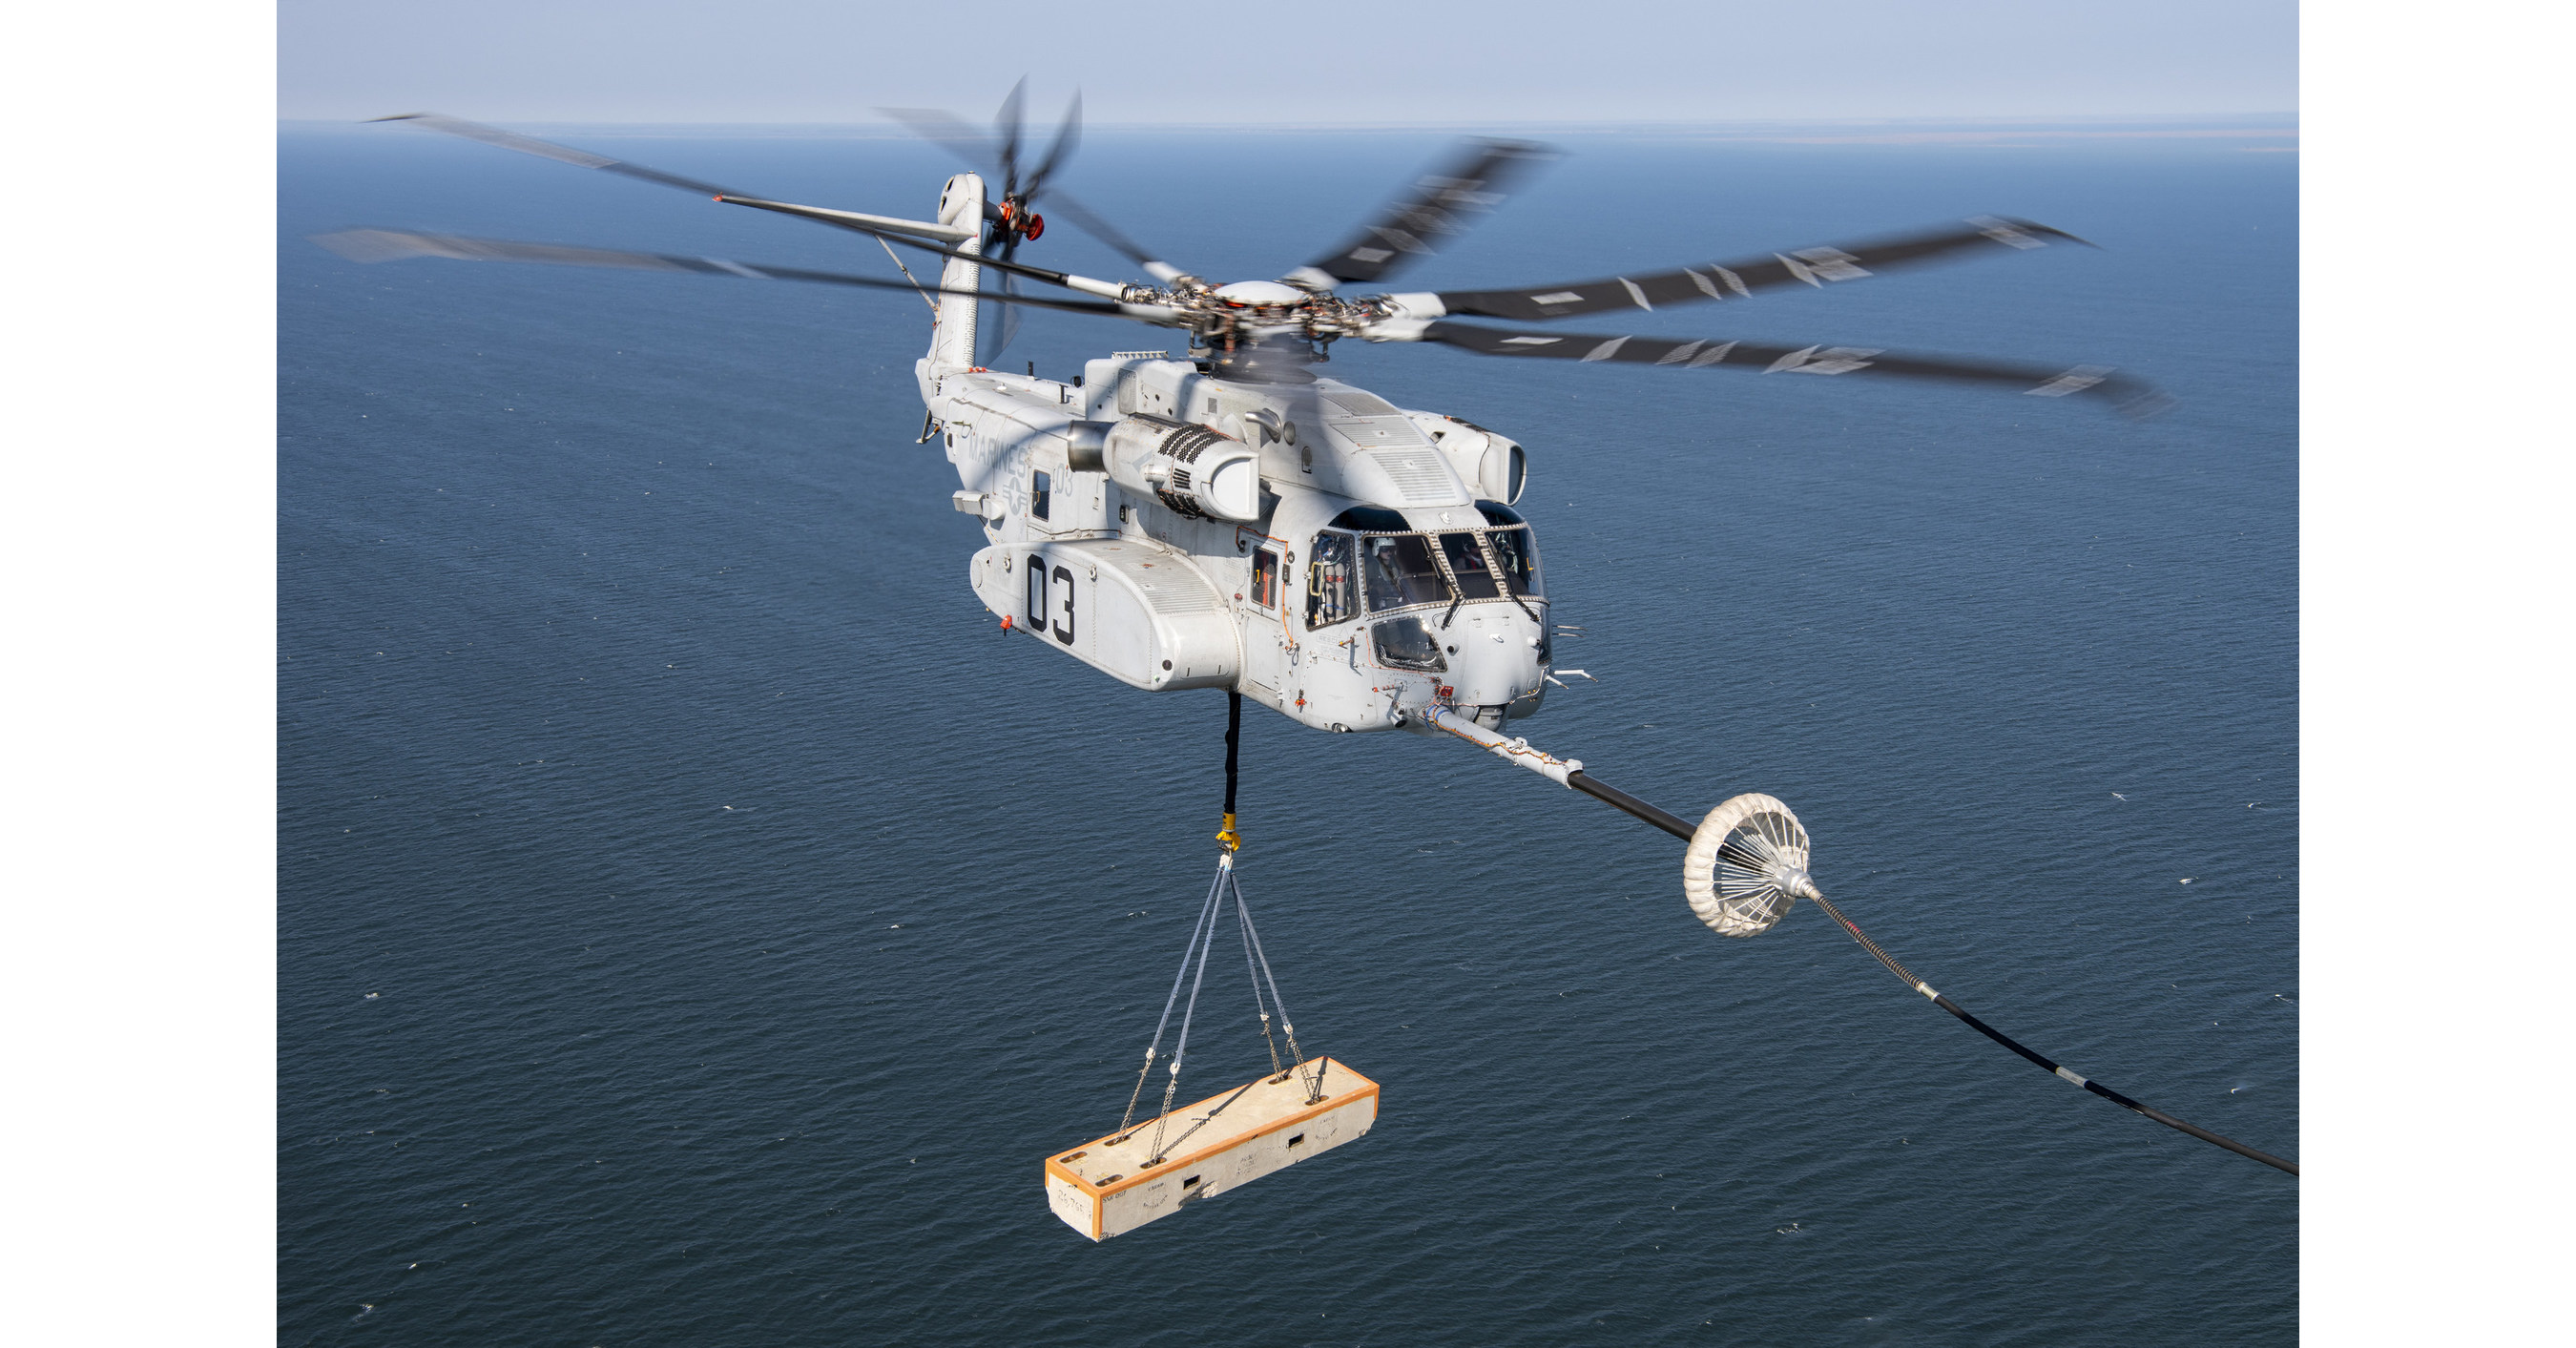 U.S. Navy Awards Sikorsky Contract to Build Six More CH-53K Heavy Lift Helicopters - Oct 28, 2020